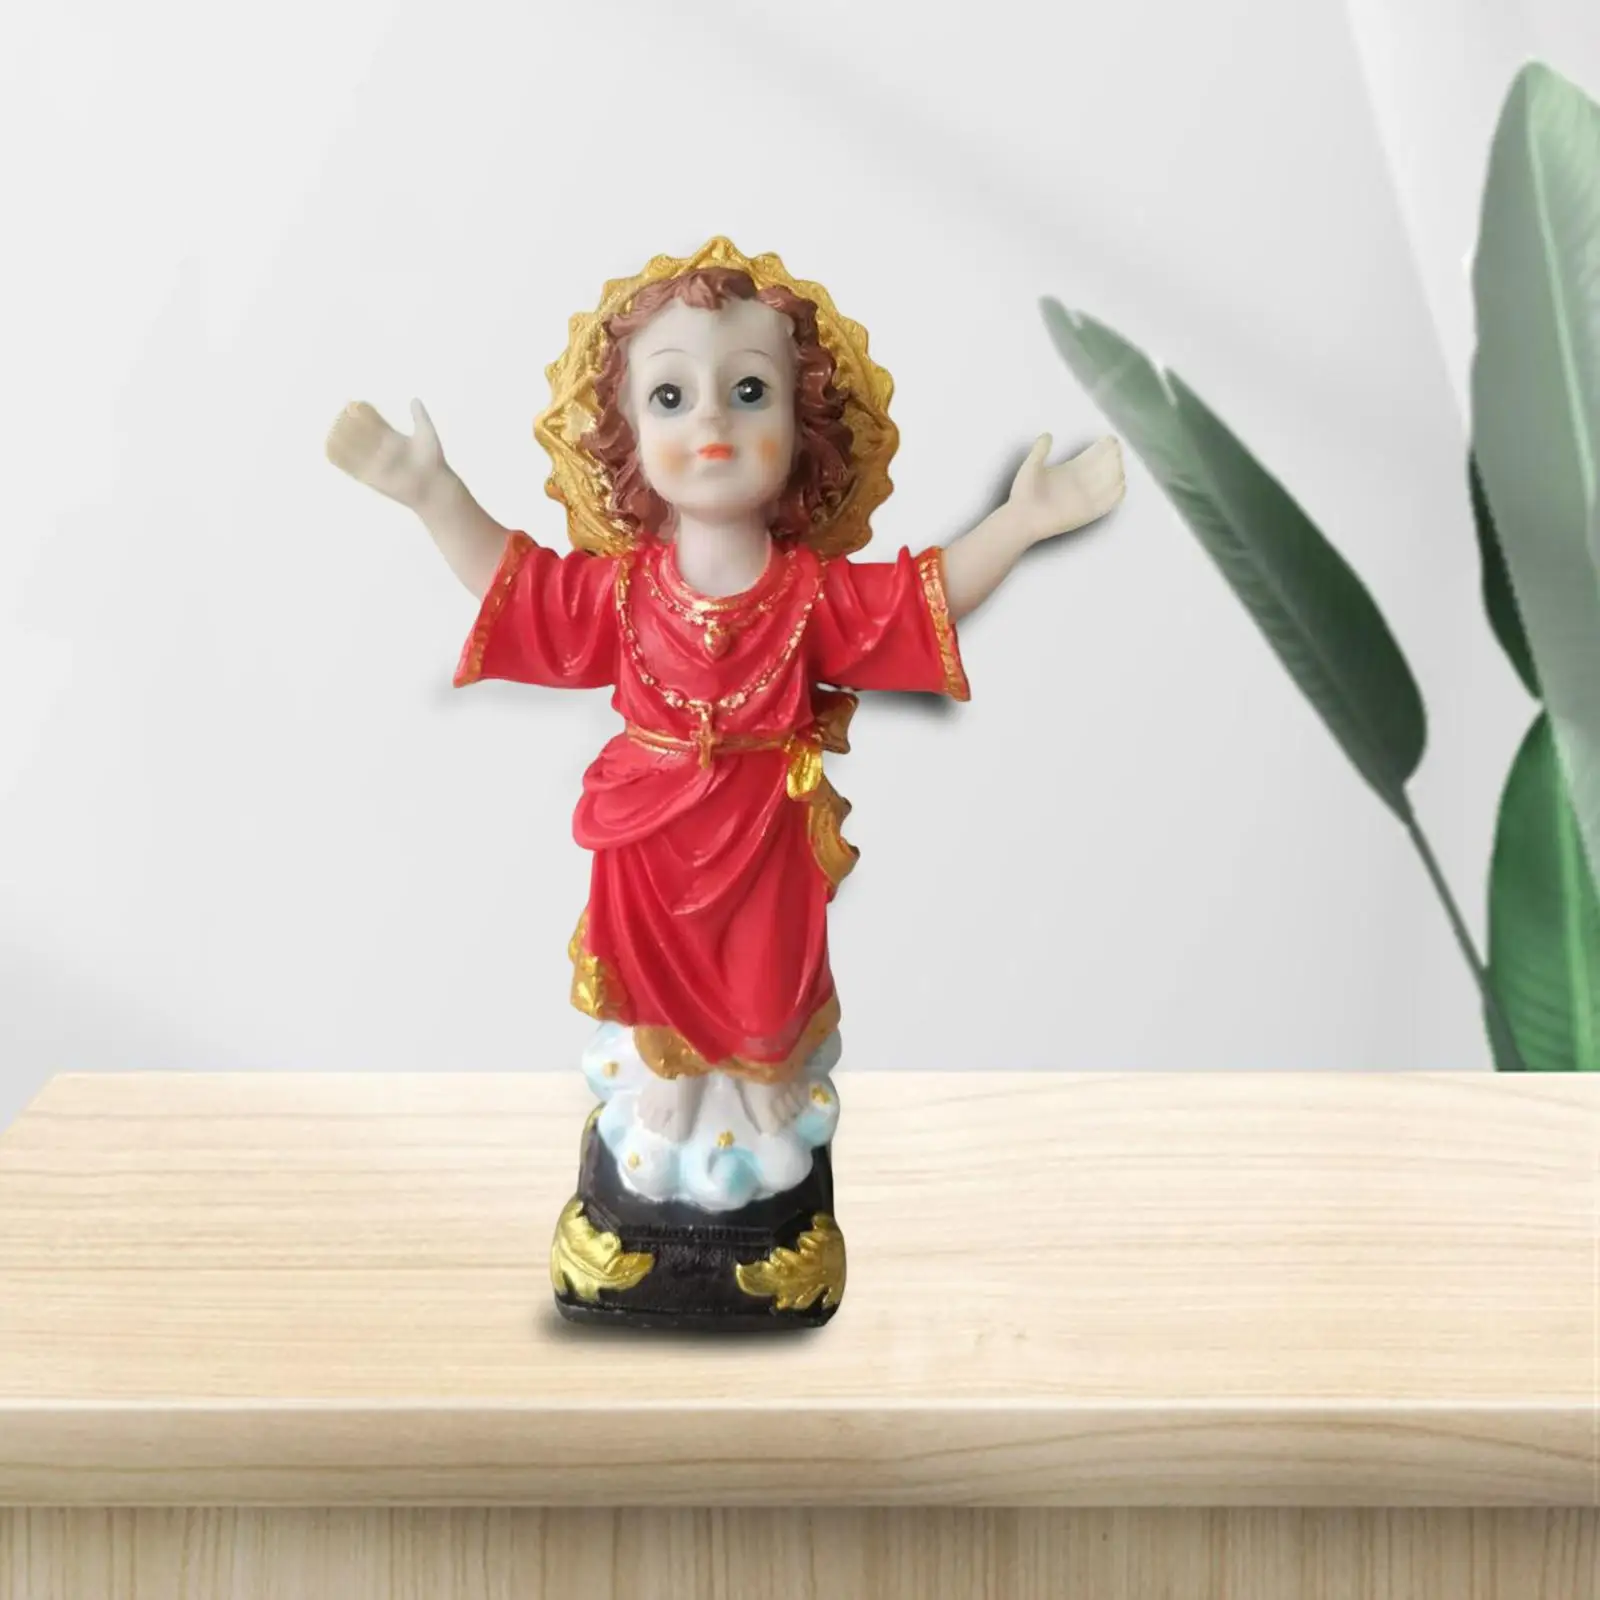 Virgin Statue Table Collectable Ornament Decorative for Rack Gift Office